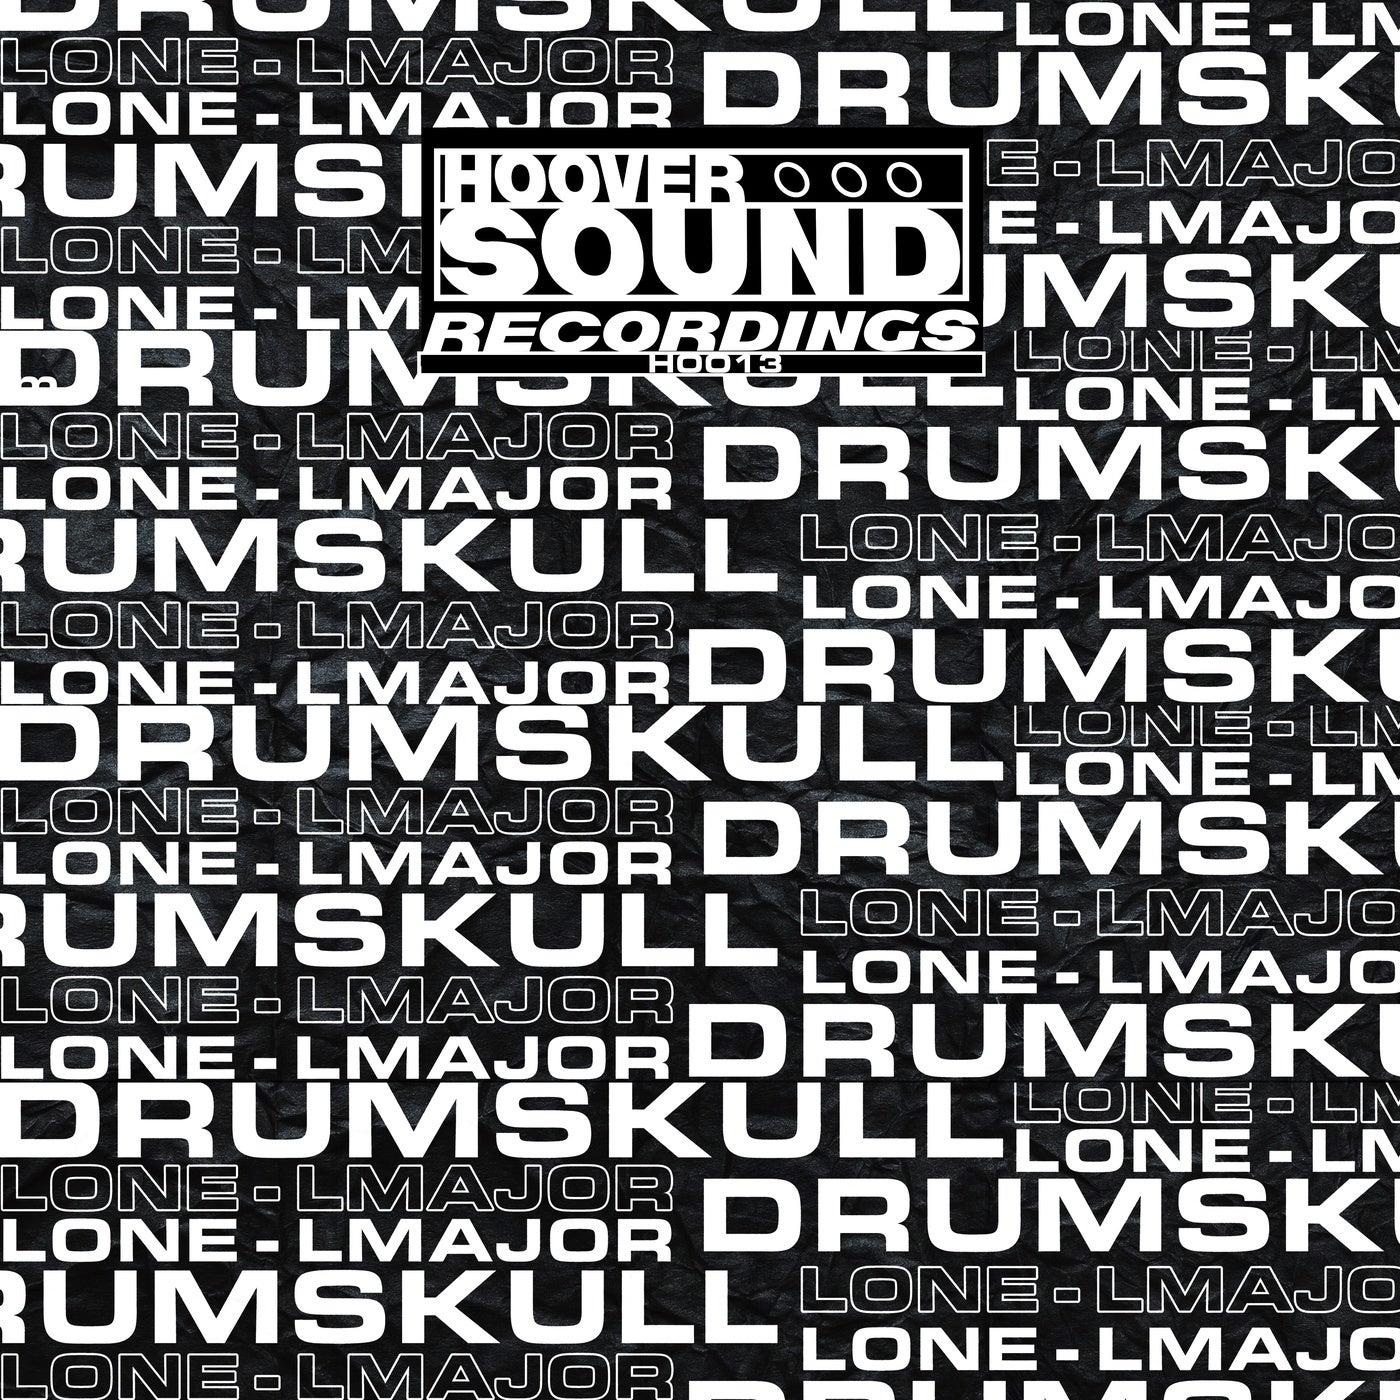 Drumskull - Muscle Memory [Hooversound Recordings]